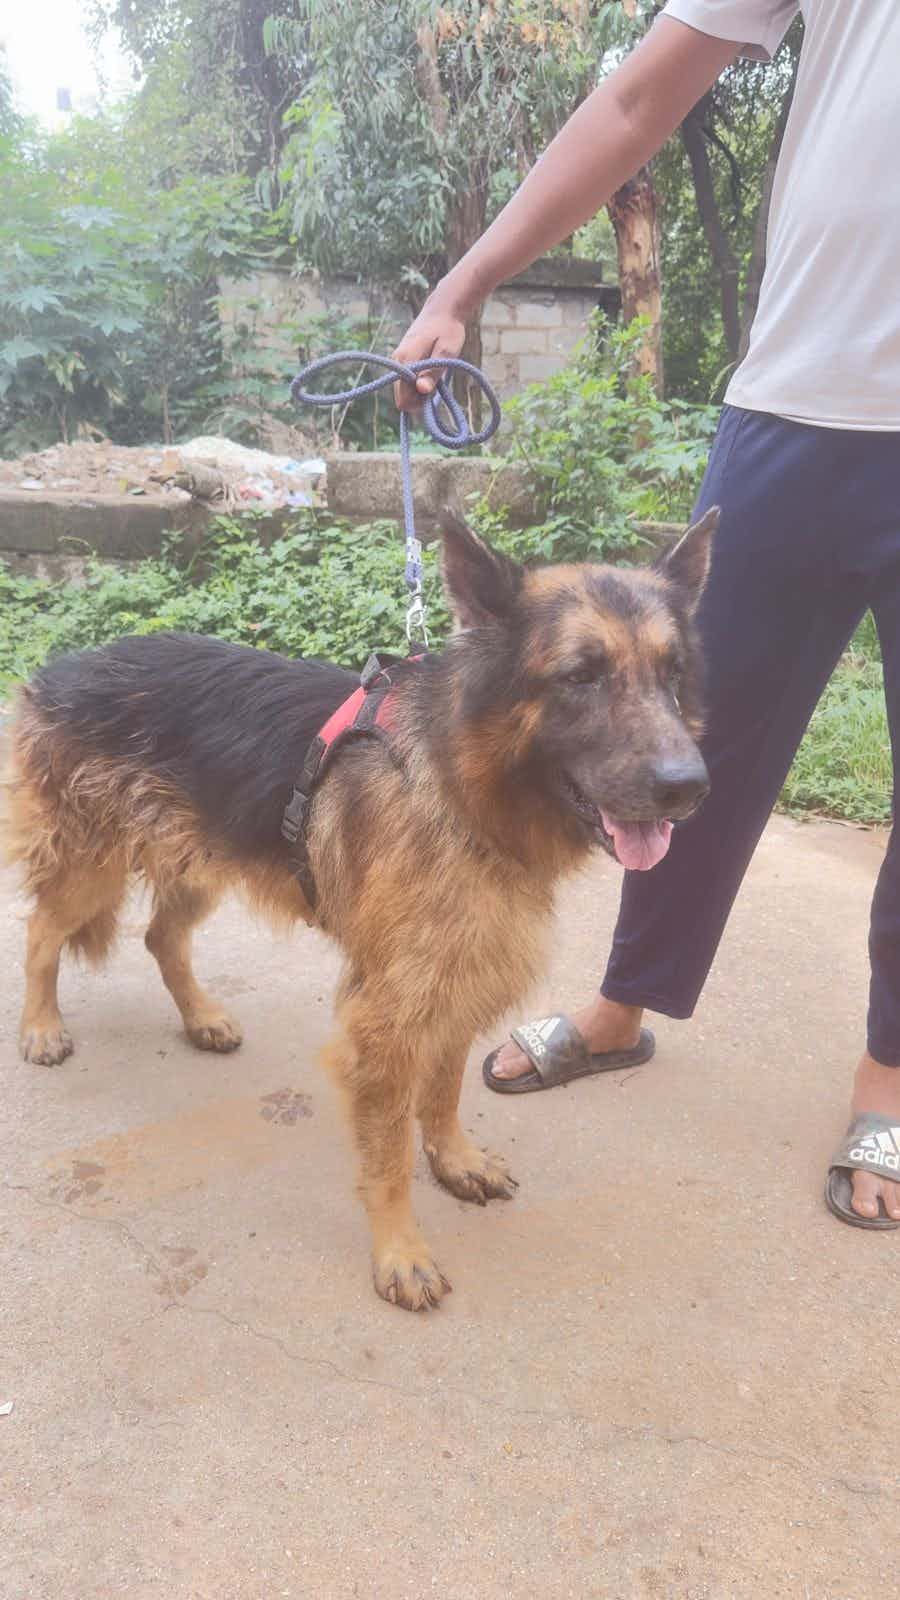 A young German shepherd dog found near SLV Defence Lavender Apartments (Yelahanka)

Location pin: https://g.co/kgs/q4kFqe

If anyone knows anything about his parents, please reach out to Mr. Atish (+91 90082 69091) or drop a comment. 

Share this post with your friends in Yelahanka to help us find his family.